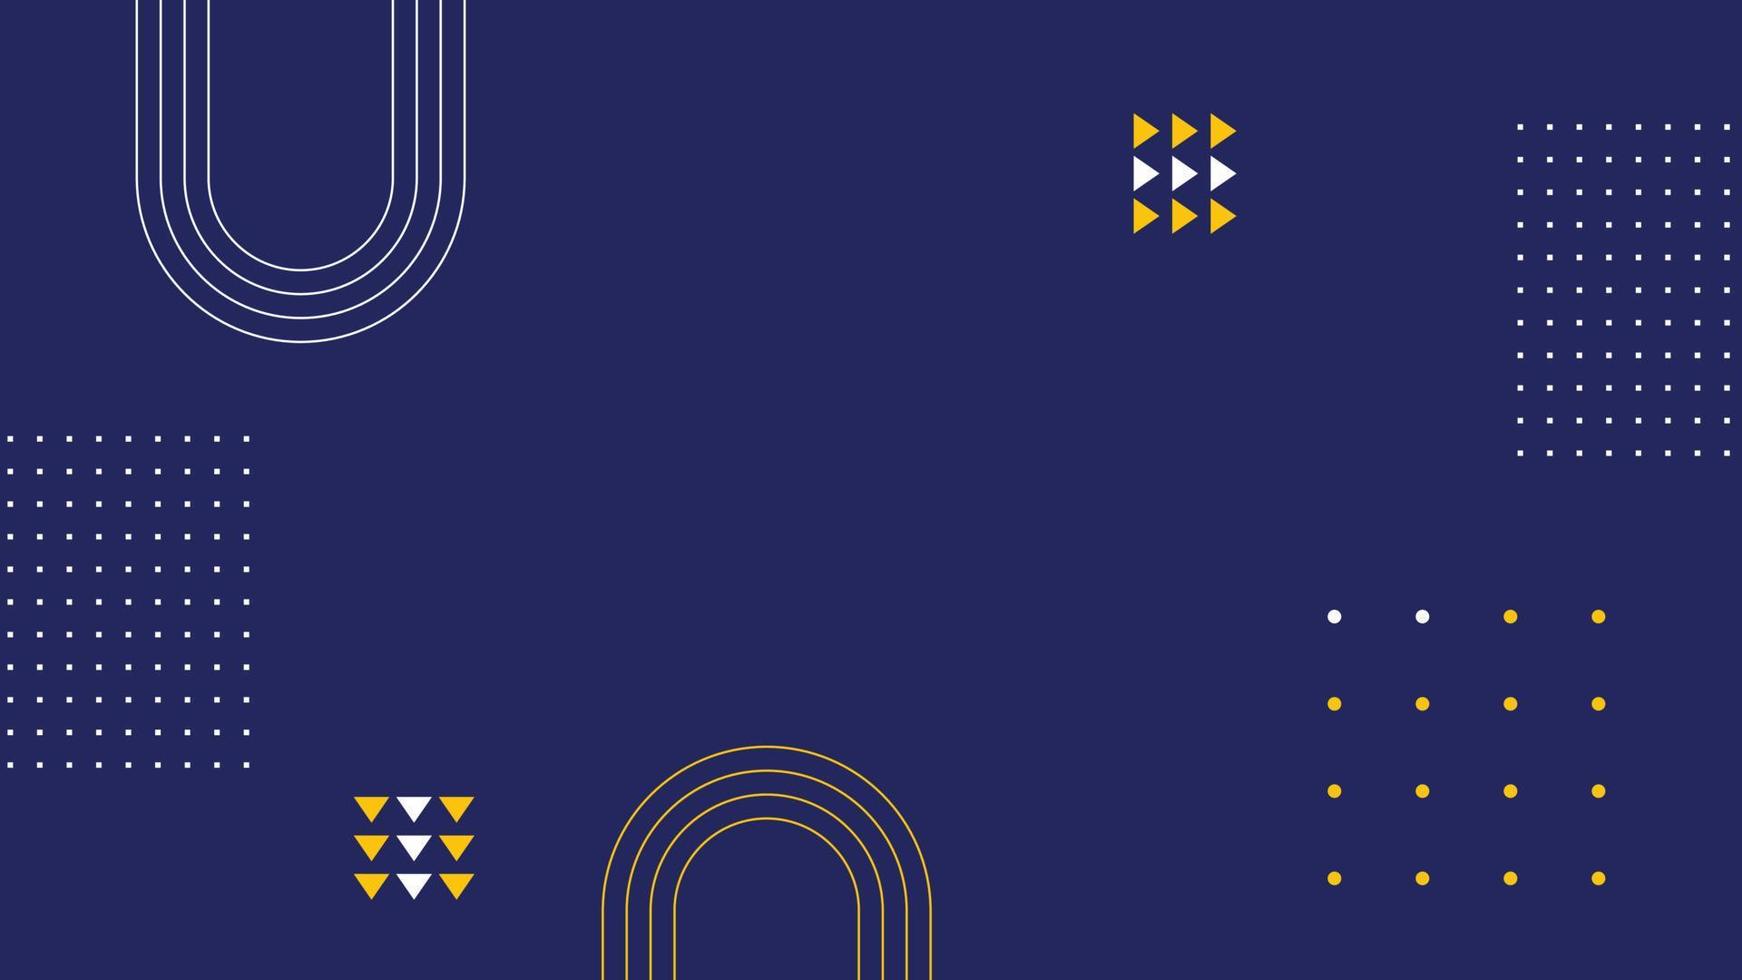 Minimal geometric dark blue background with abstract shapes. Vector illustration